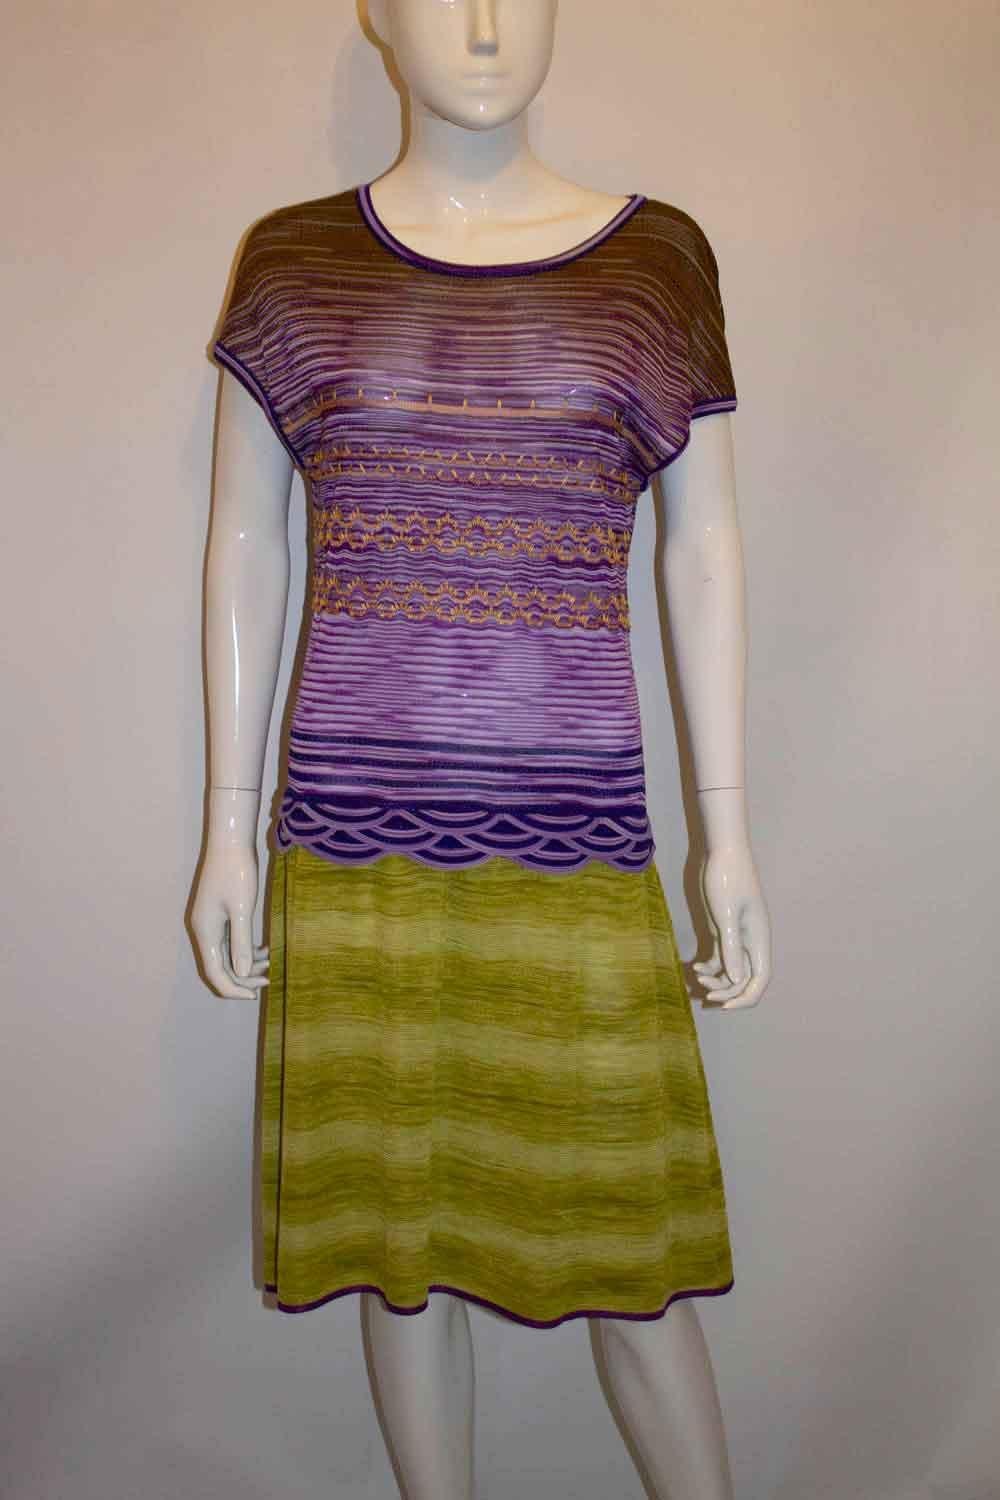 A chic and easy to wear dress by Missoni, brown label/main line. The dress is in a wonderful colour combination , with a lilac and orange top , and green skirt. The dress is unlined. Size 44
Measurements: Bust up to 38'', length 39''